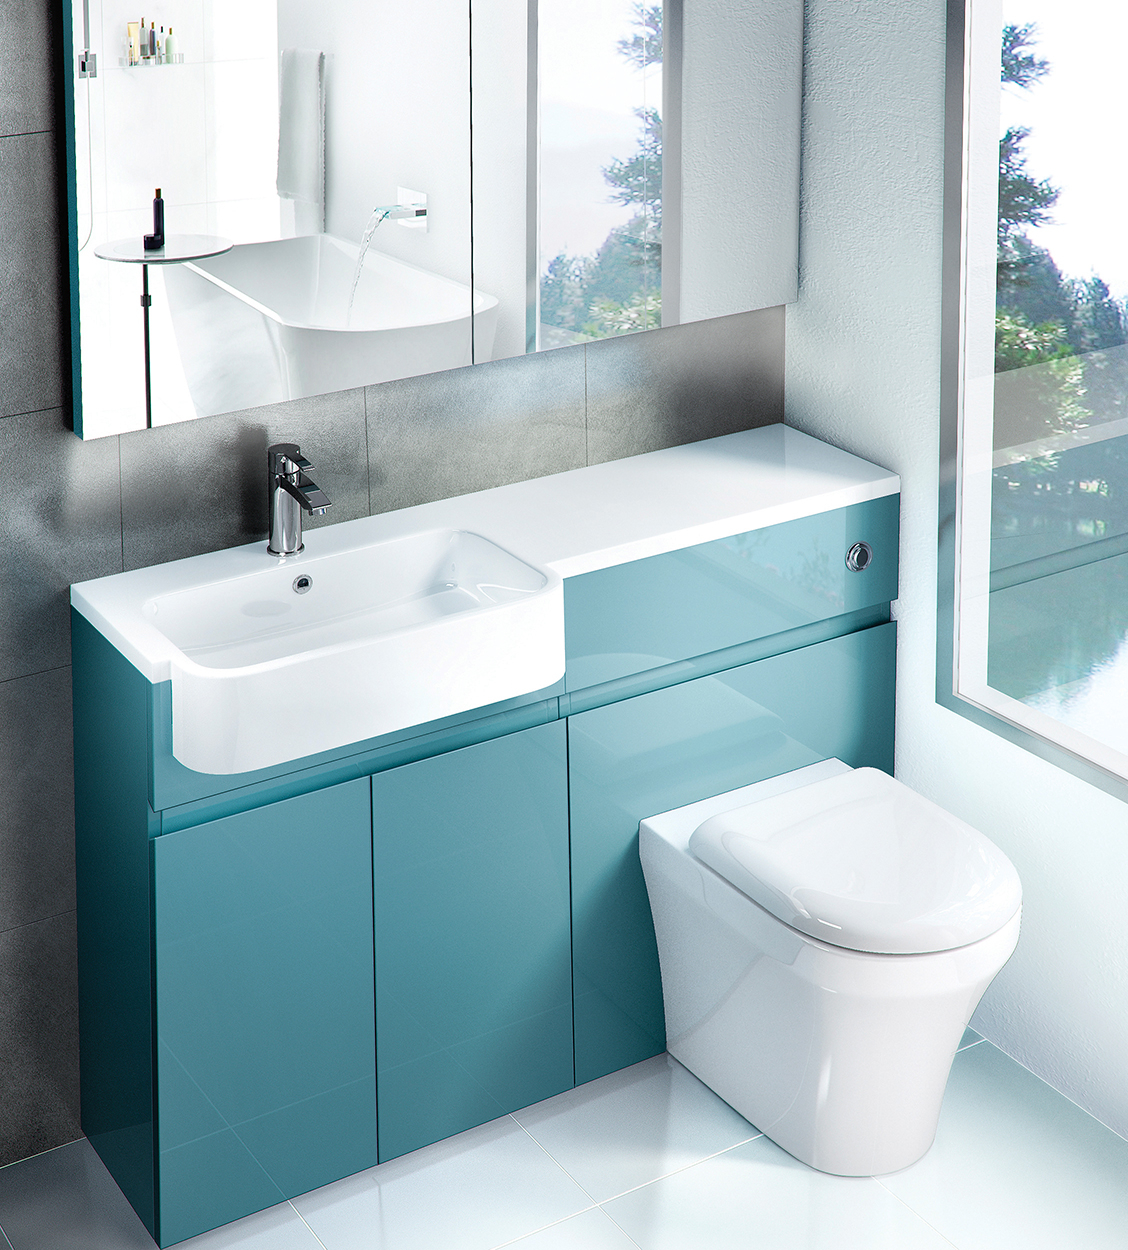 Aqua Cabinets D300 1200mm Fitted Furniture Pack Uk Bathroom pertaining to dimensions 1128 X 1250